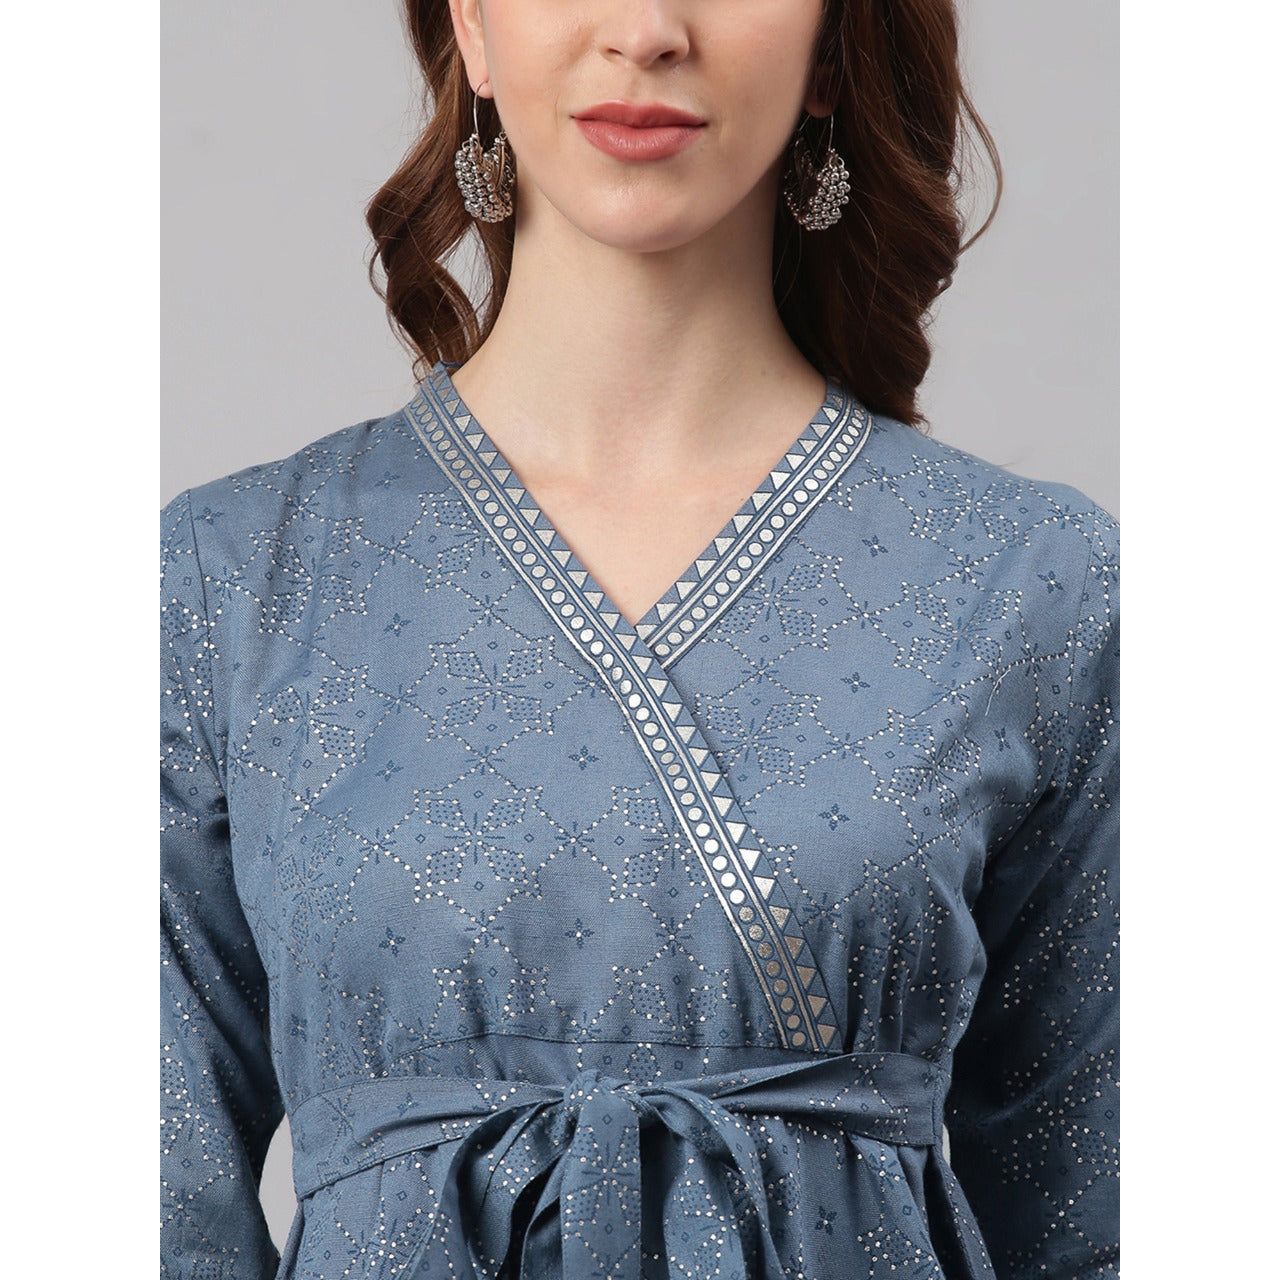 Fusion Wear Cotton Dress / Indo Western Wear Outfit for Women